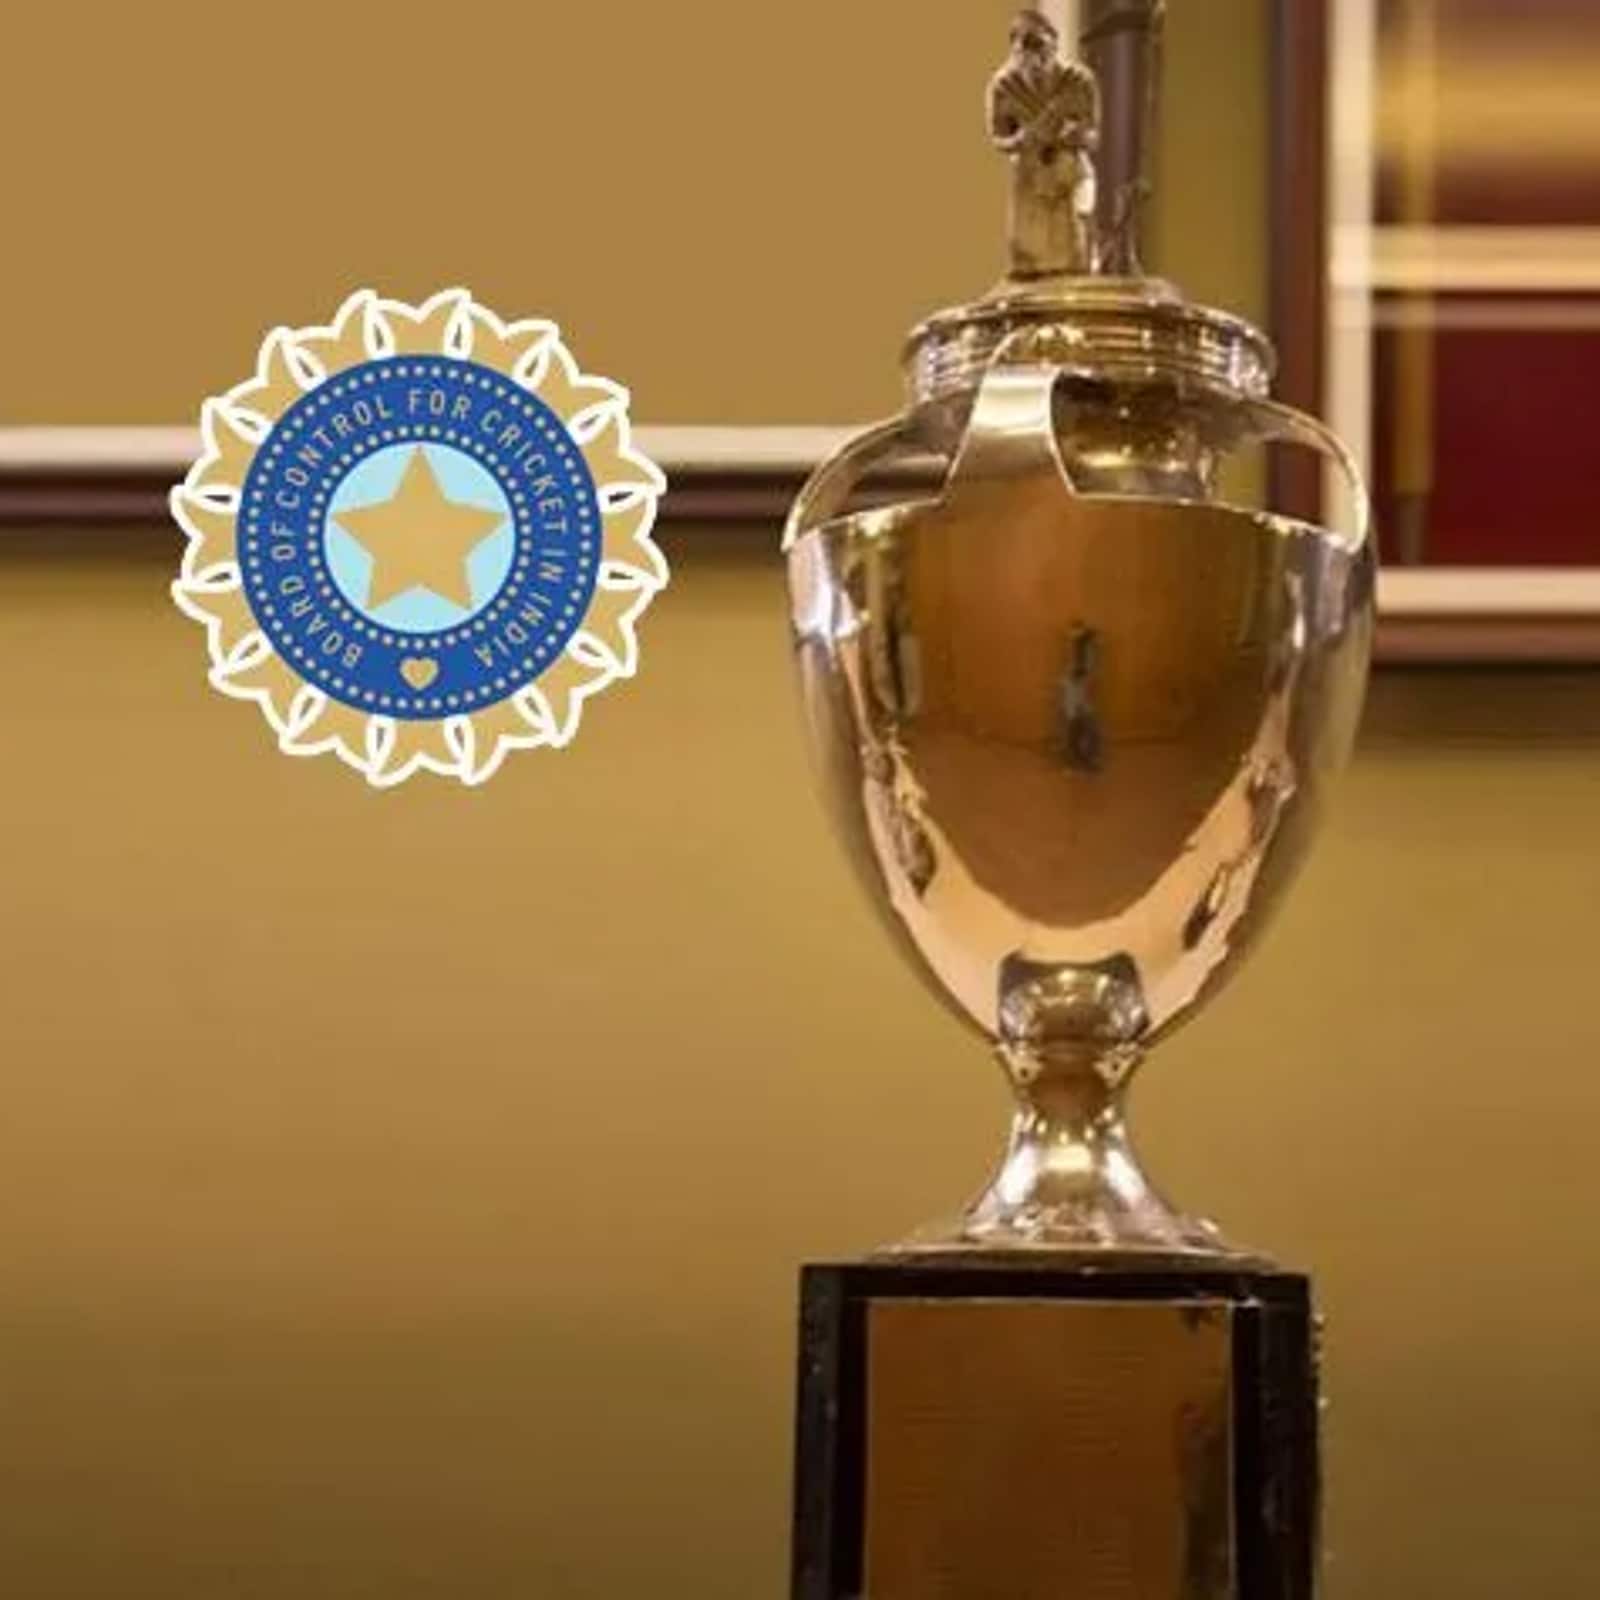 EZ vs NZ Duleep Trophy 2022 Live Streaming When and Where to watch the Duleep Trophy match between East Zone and North Zone Live Coverage on Live TV Online